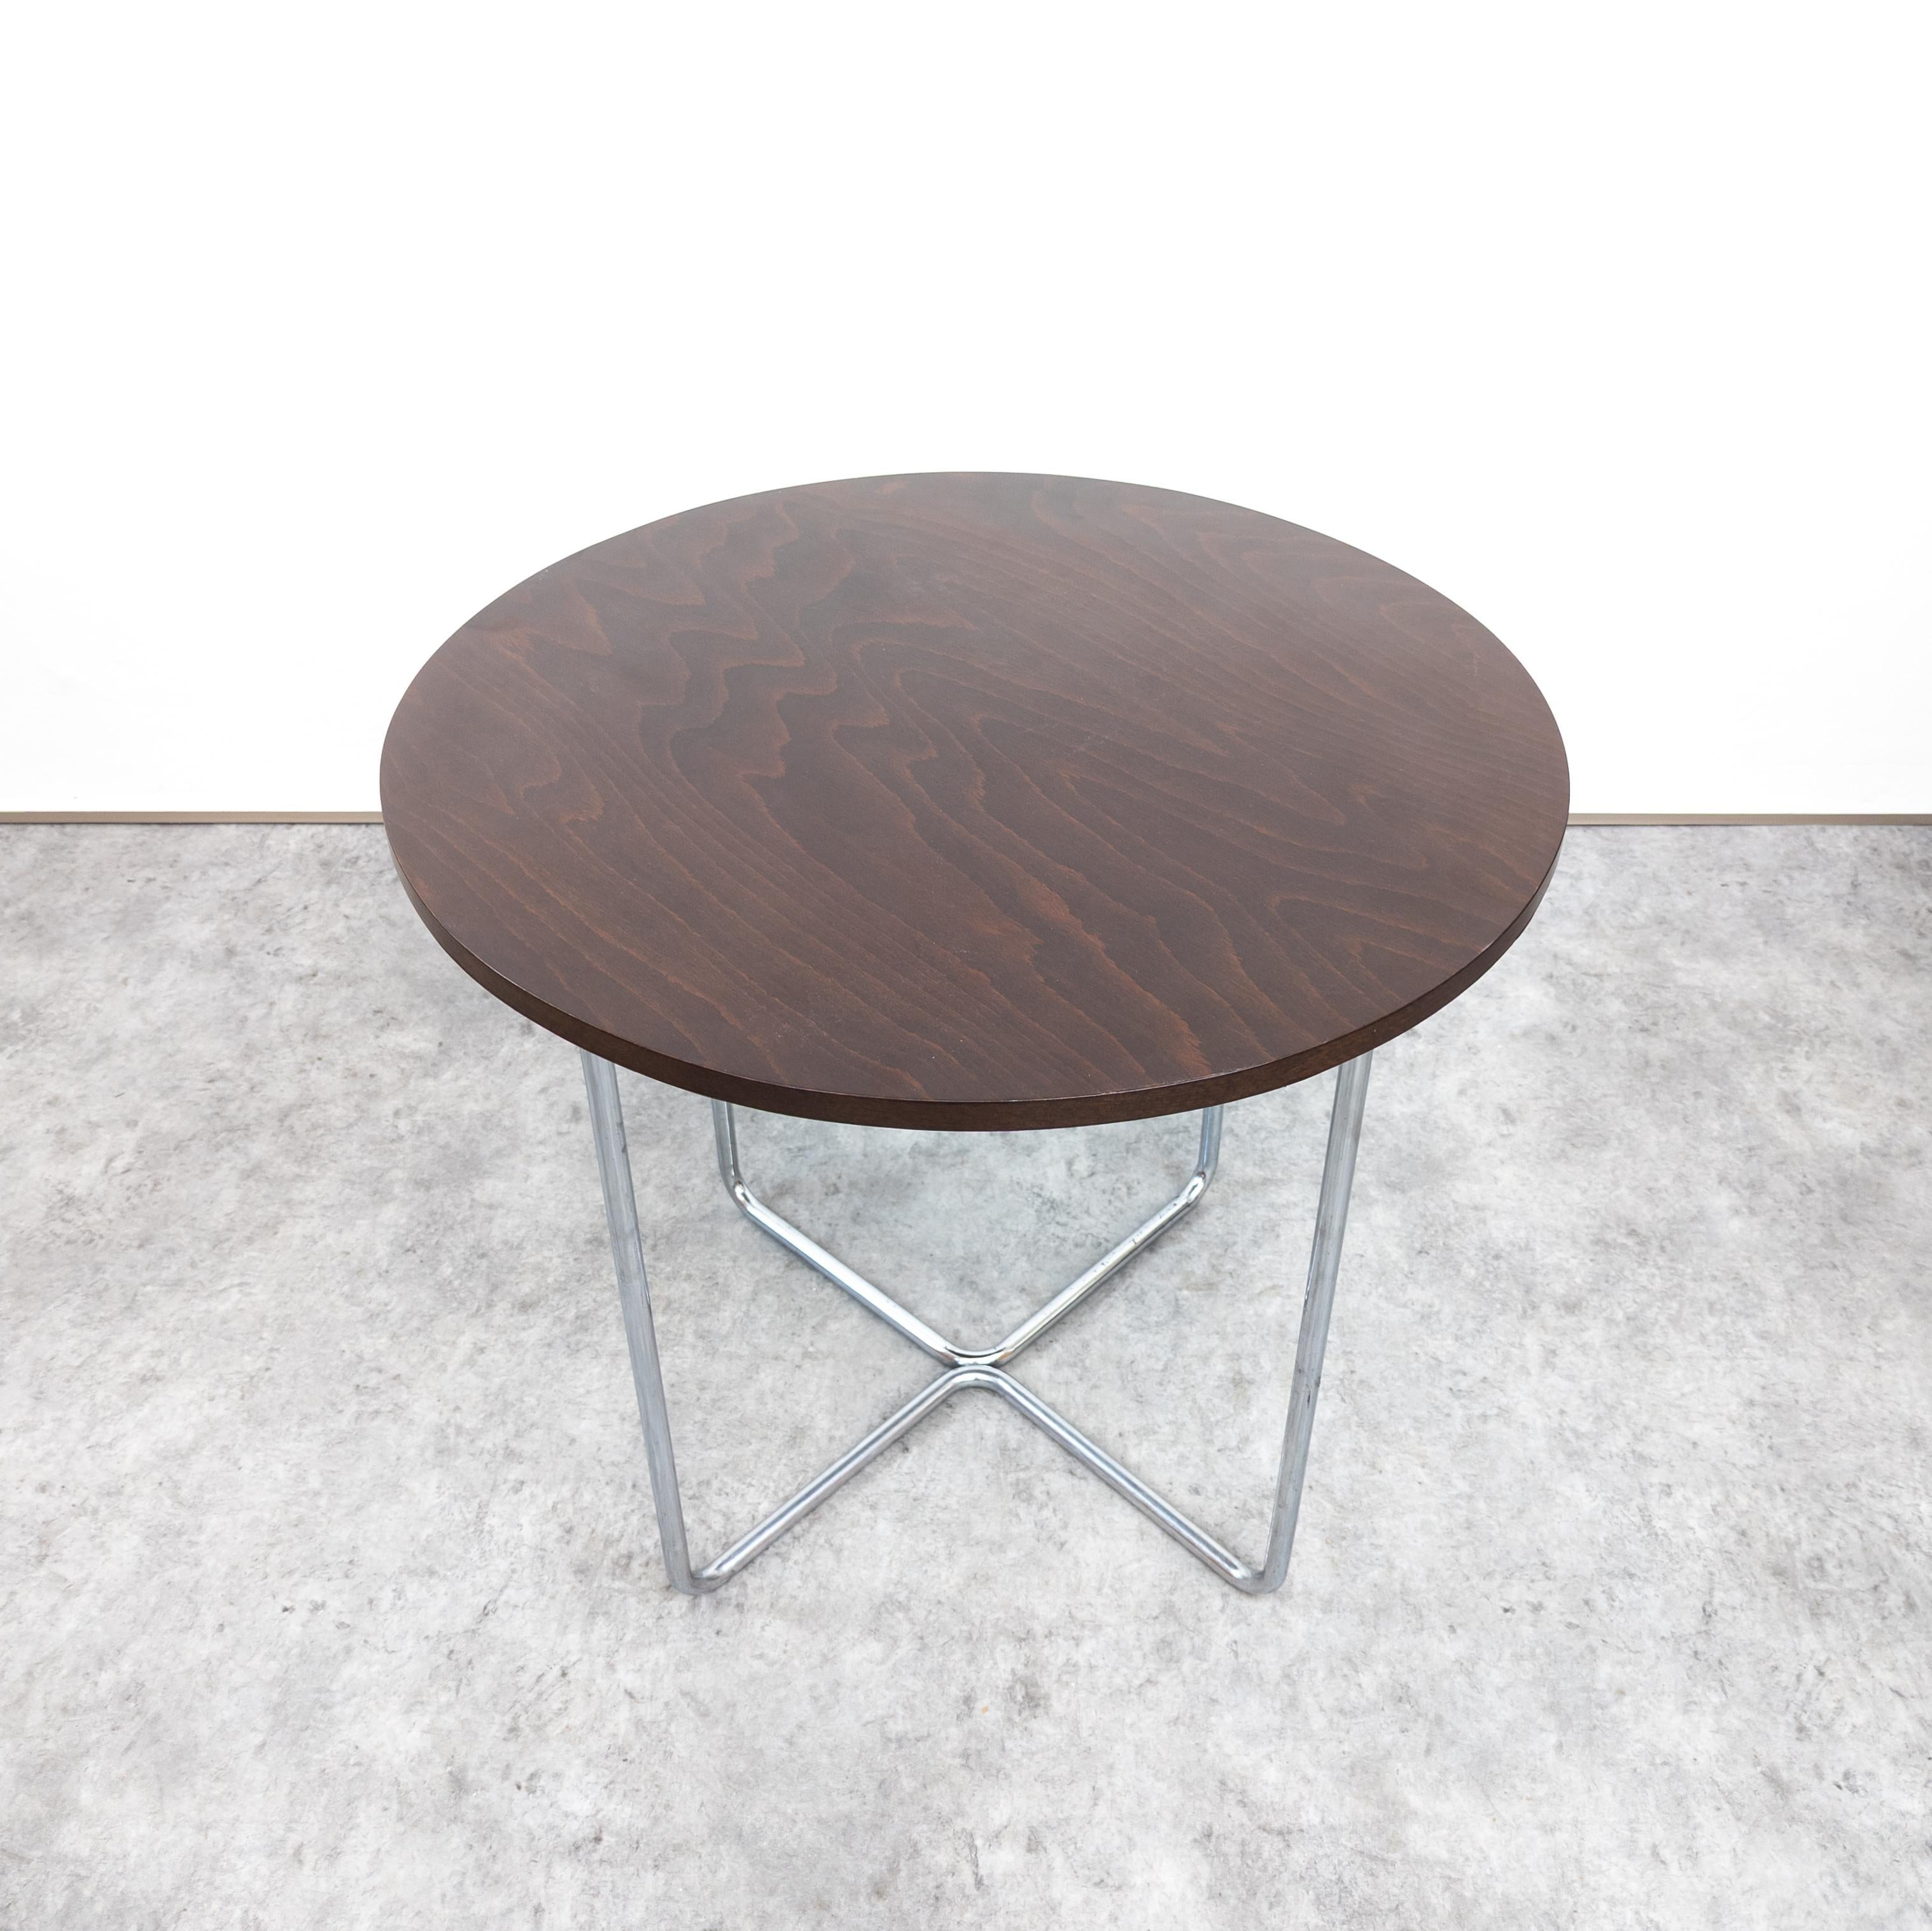 Lacquered Thonet B 27 Tubular Steel Table by Marcel Breuer Variant from Slezák